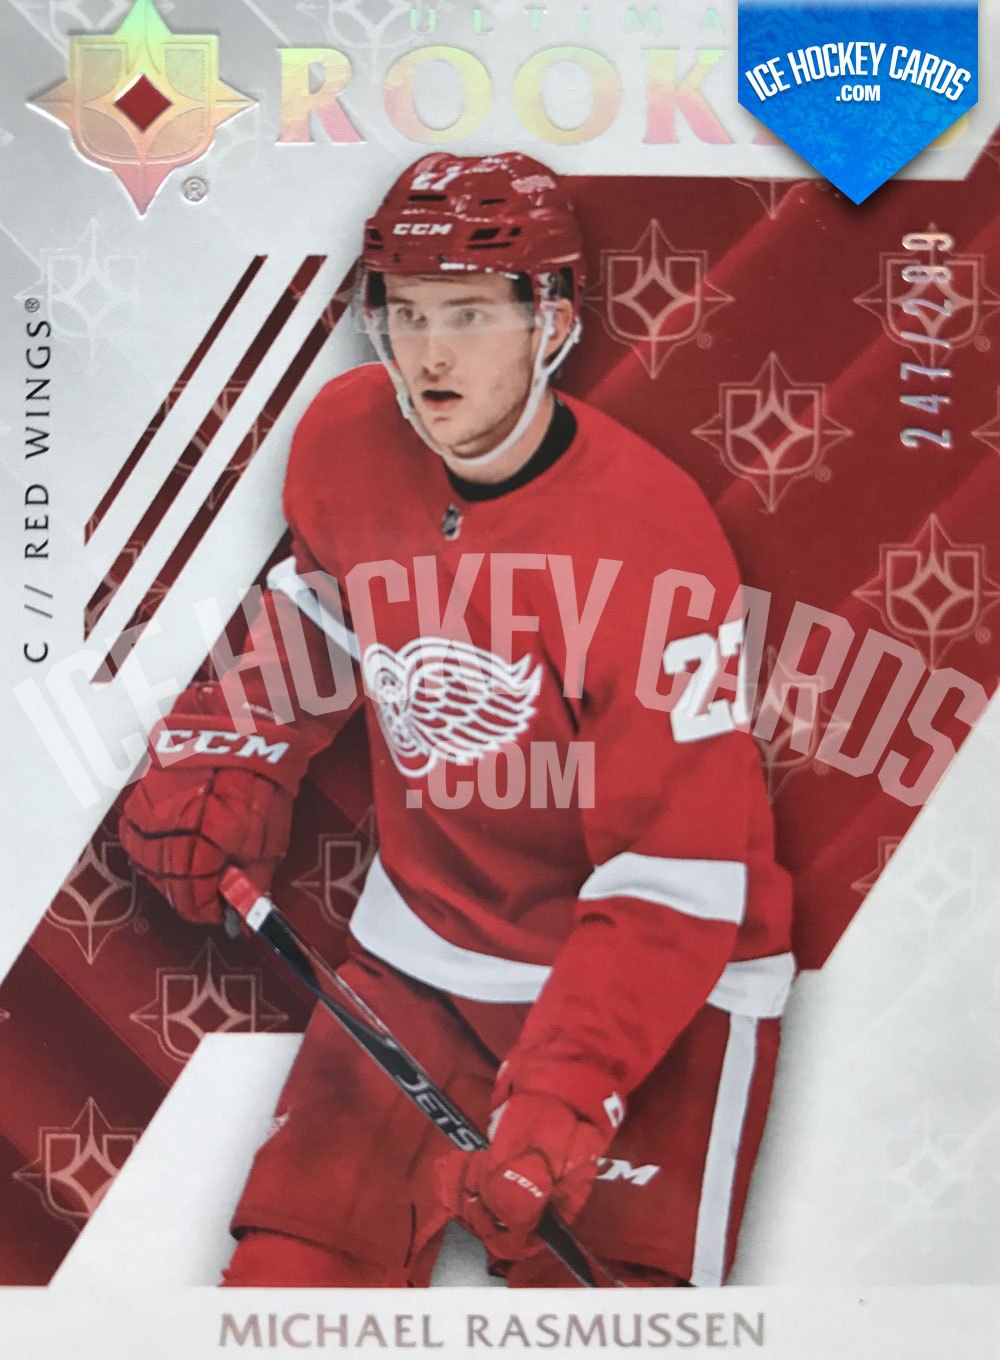 19/20 UPPER DECK MICHAEL RASMUSSEN UD GAME USED JERSEY RED SP